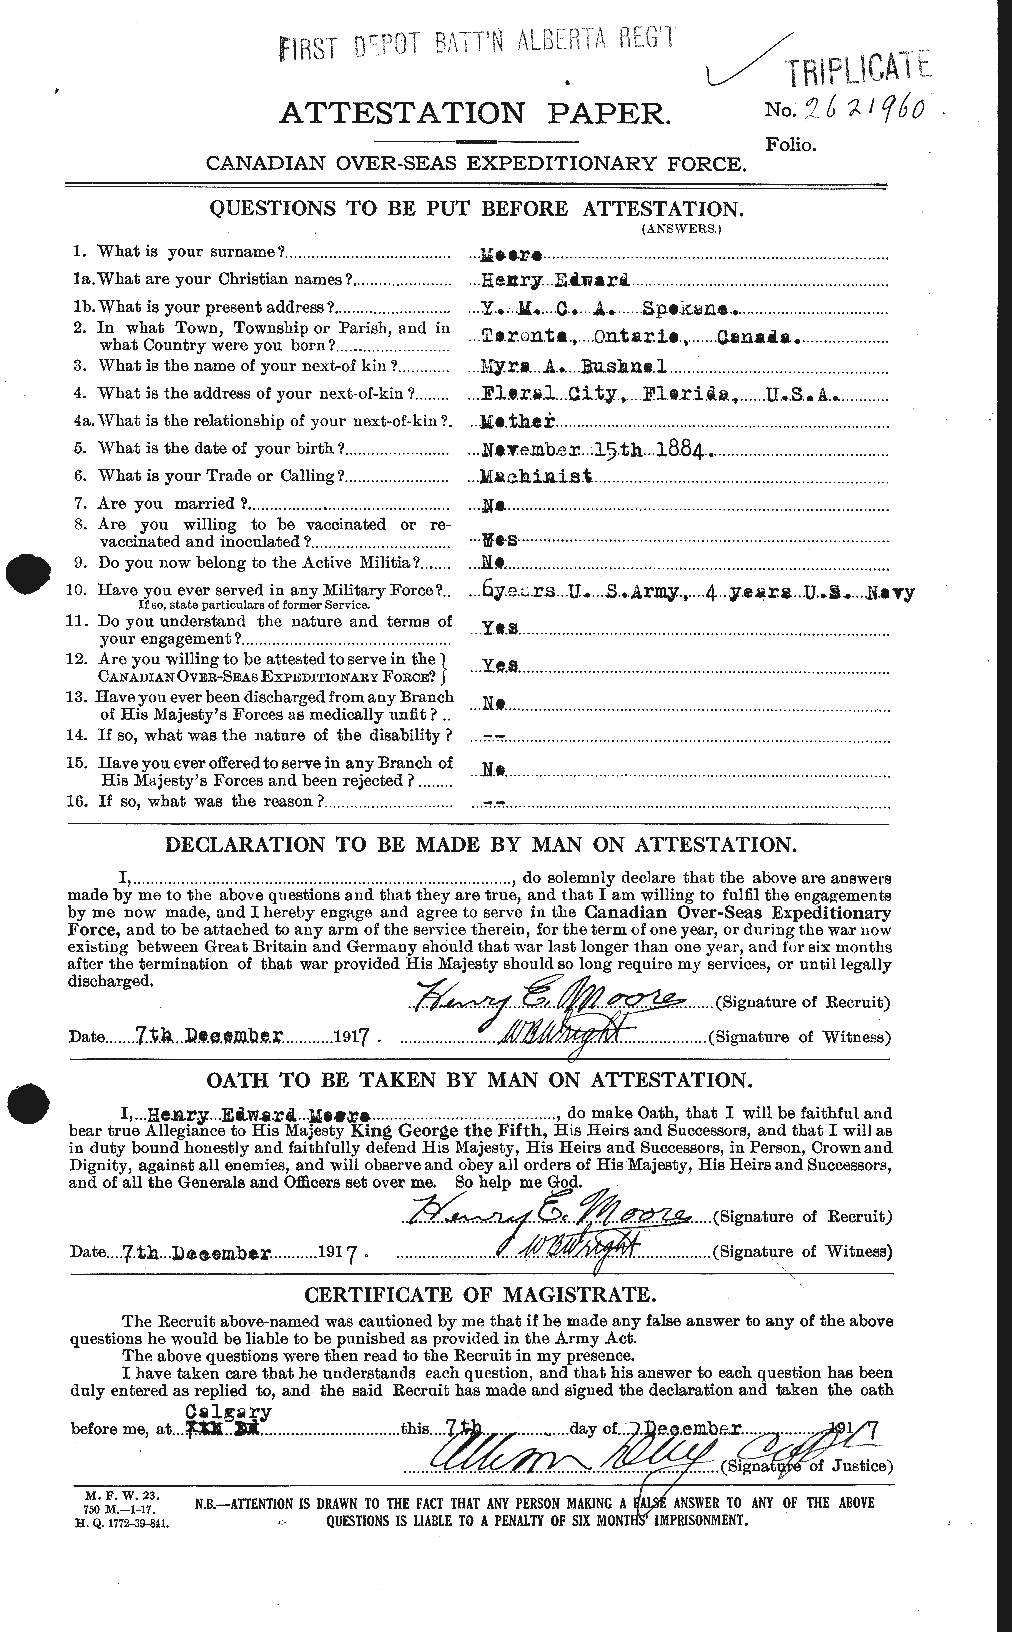 Personnel Records of the First World War - CEF 502102a